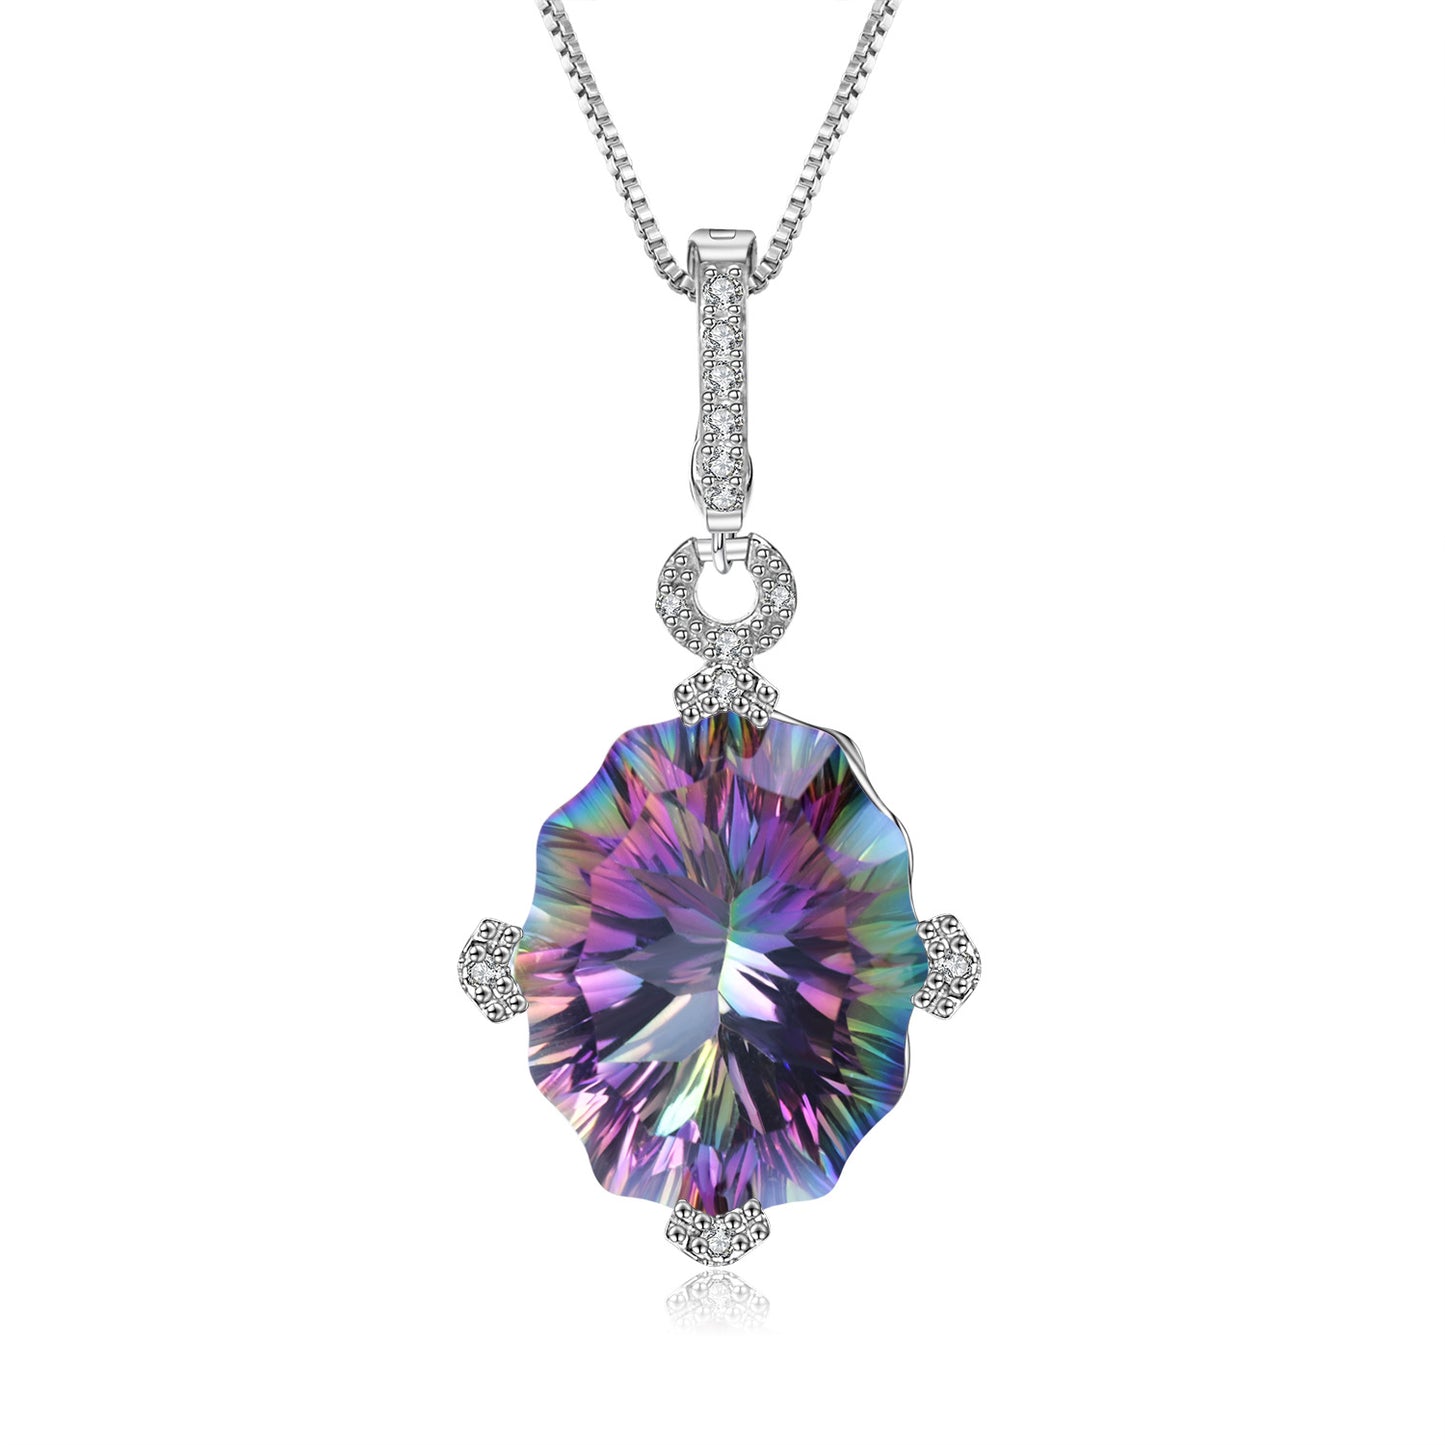 Crystal Pendant Silver Necklace for Women